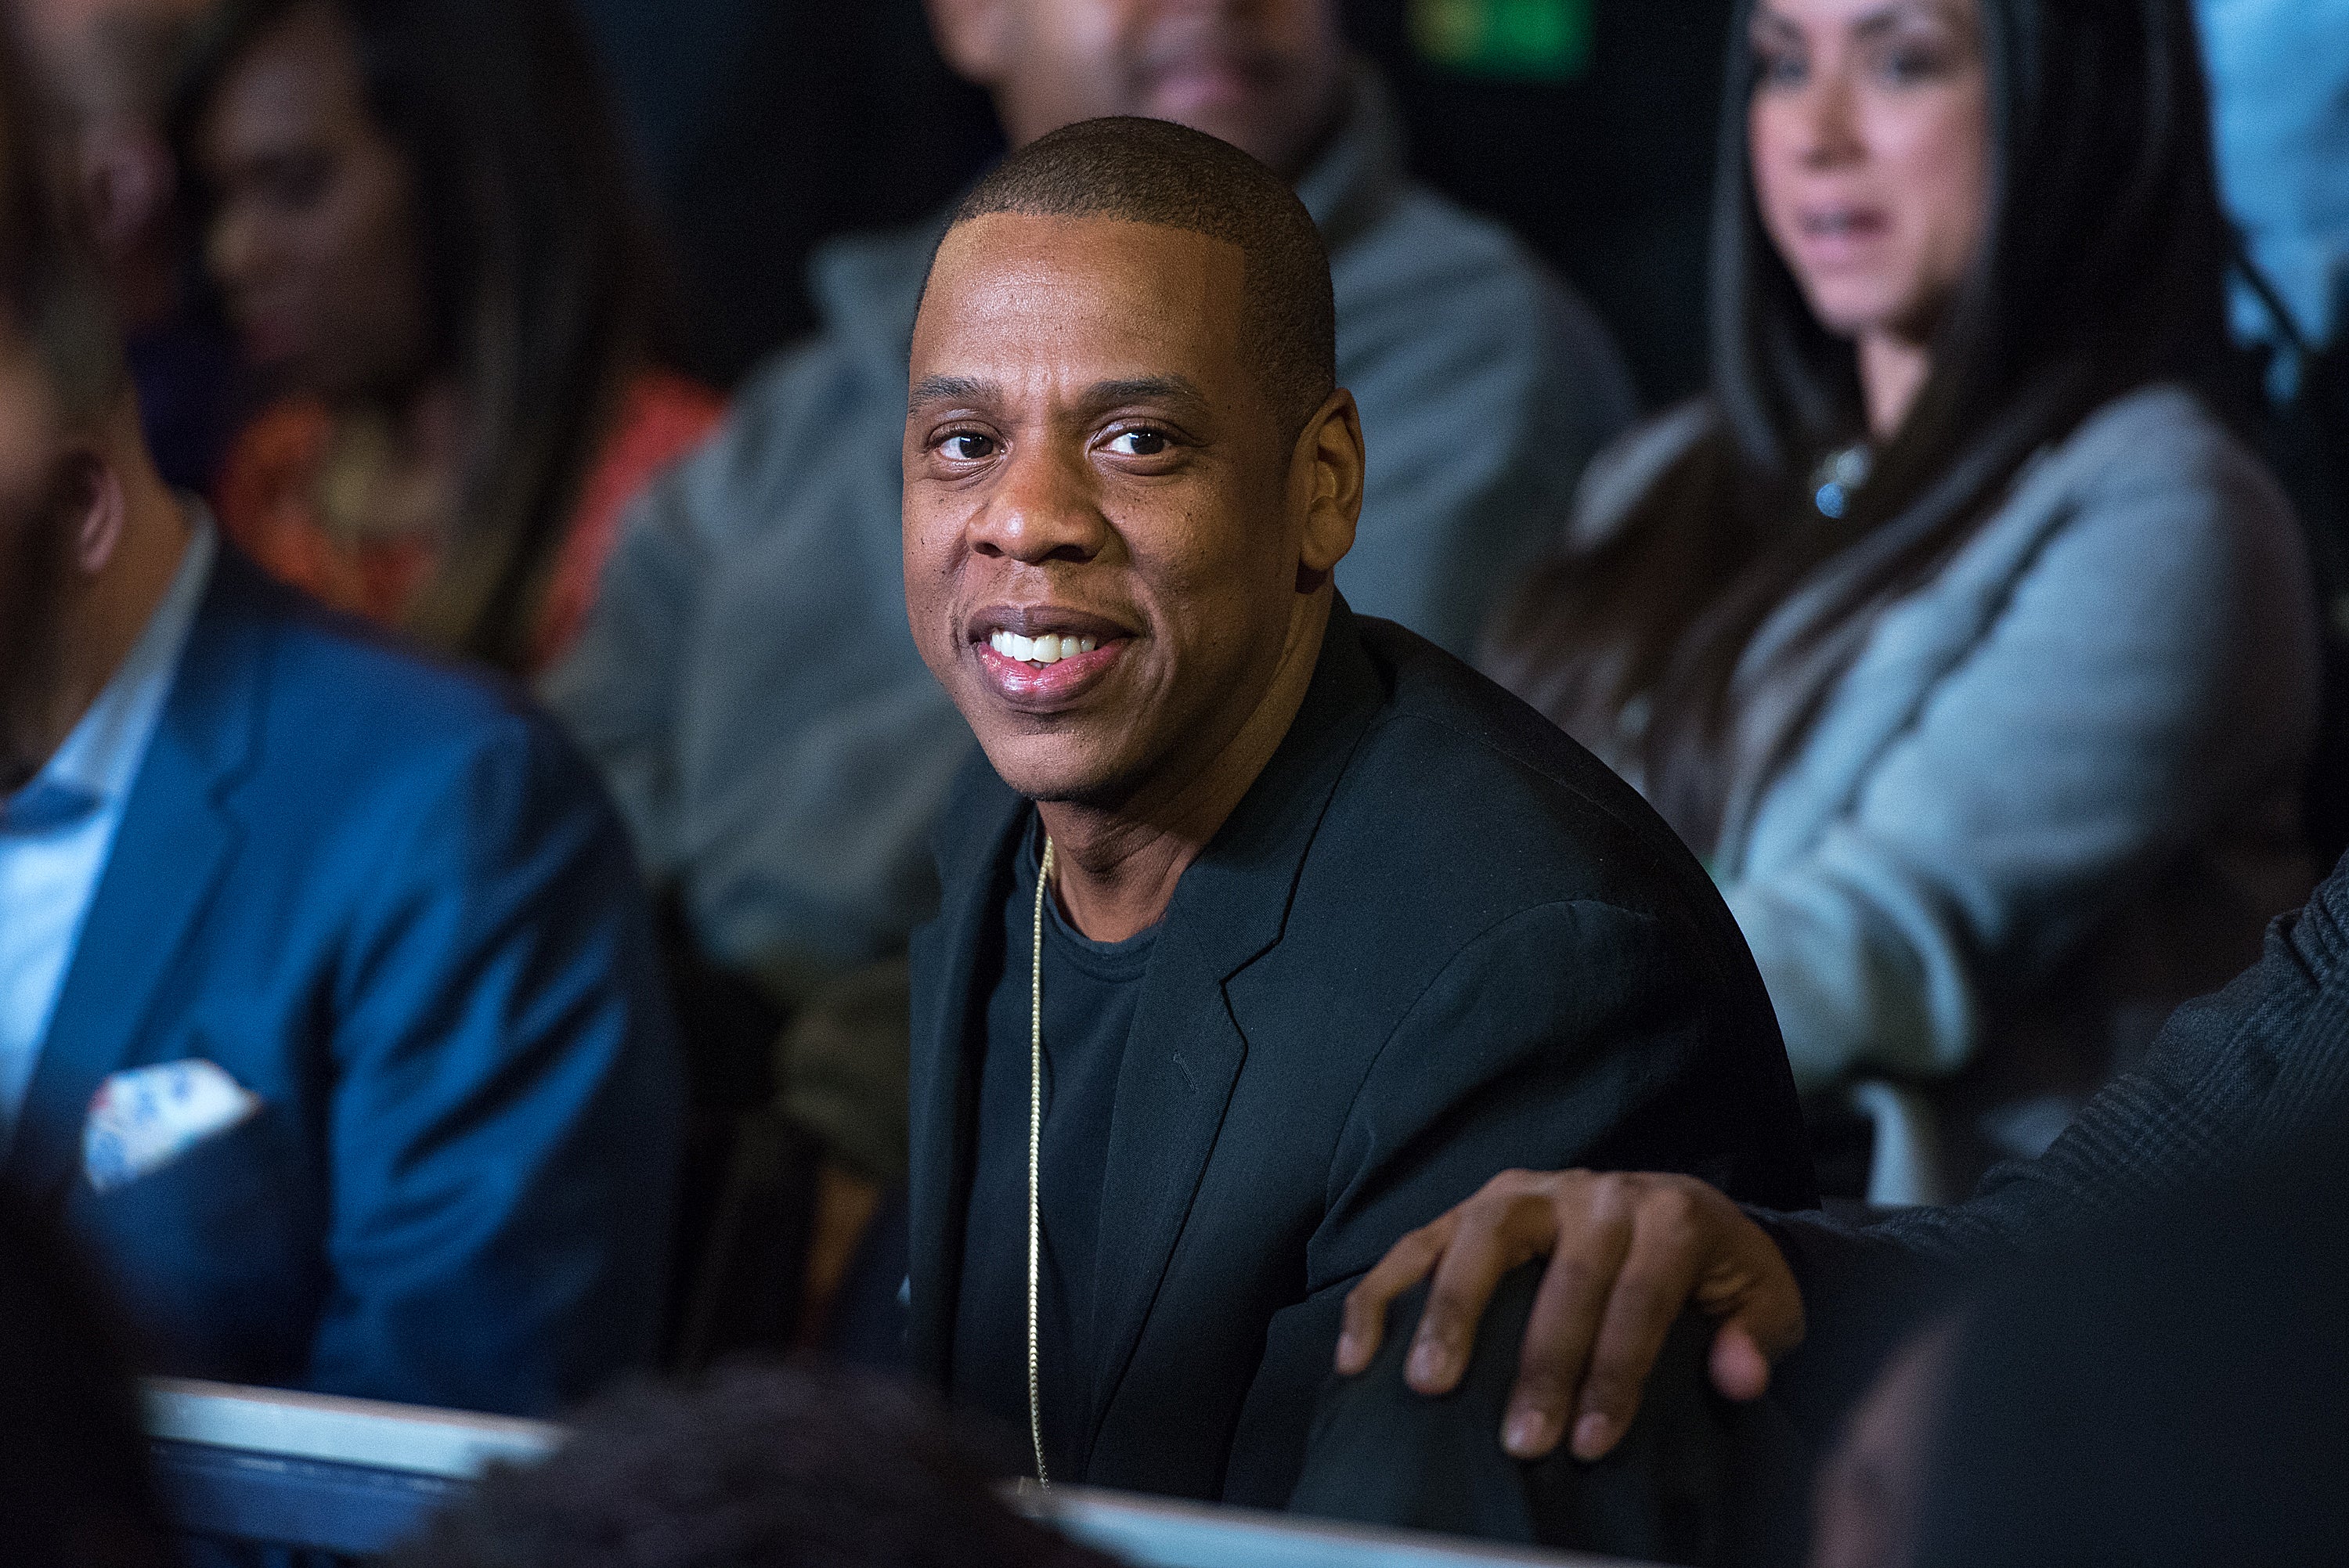 Jay Z Will Hold A Town Hall To Discuss Time: The Kalief Browder Story